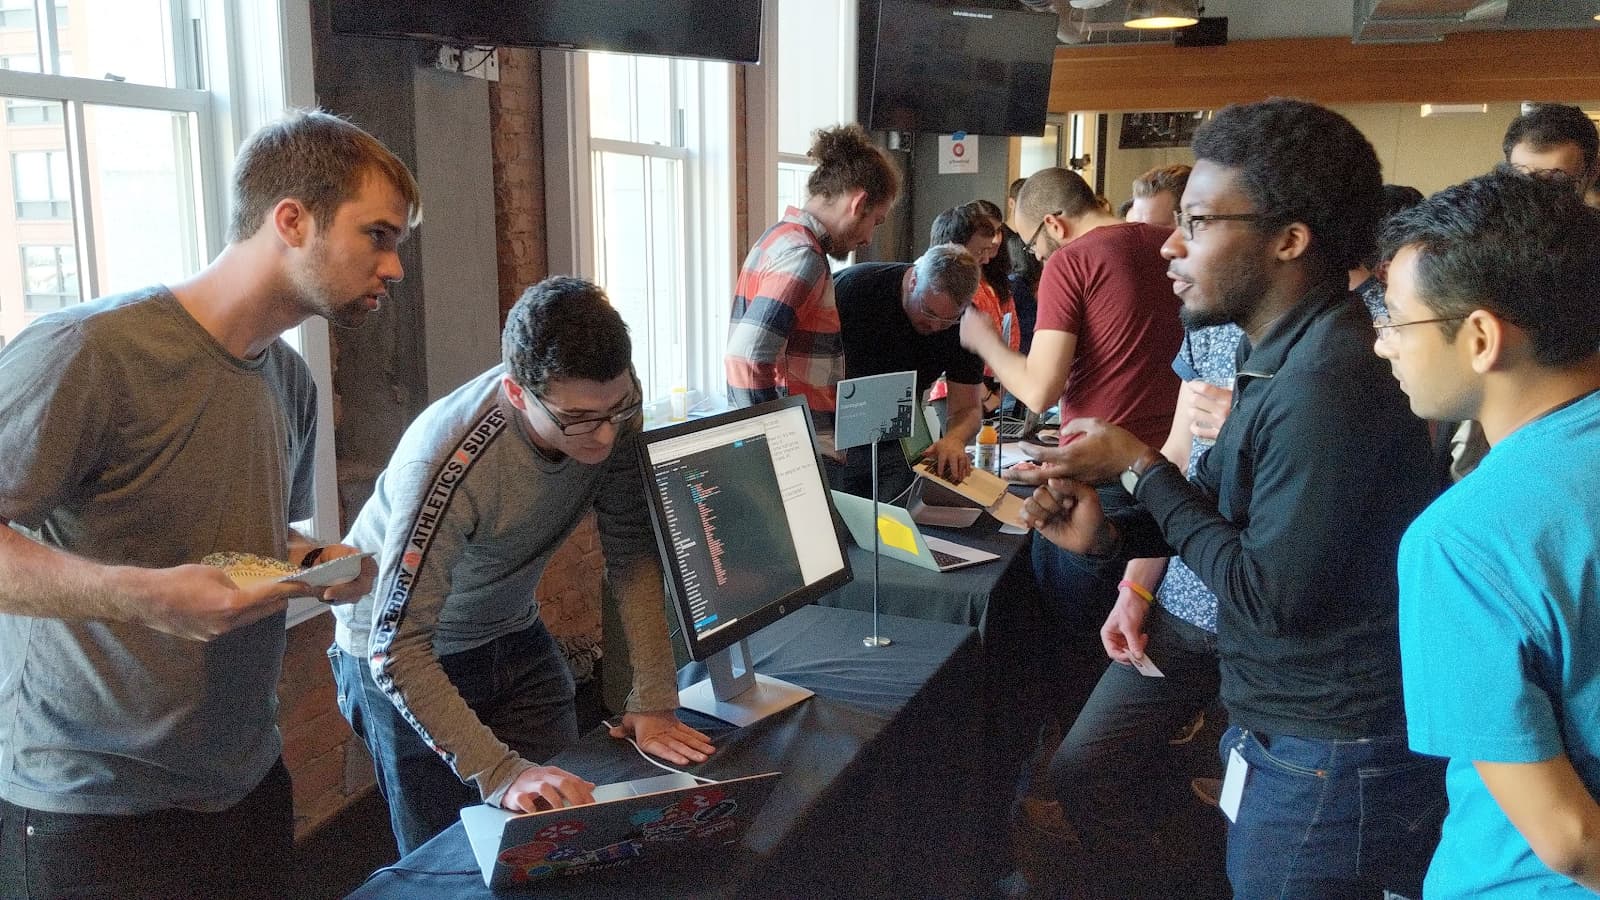 Showing off Sourcegraph to Yelpers at the Hackathon “Science Fair”